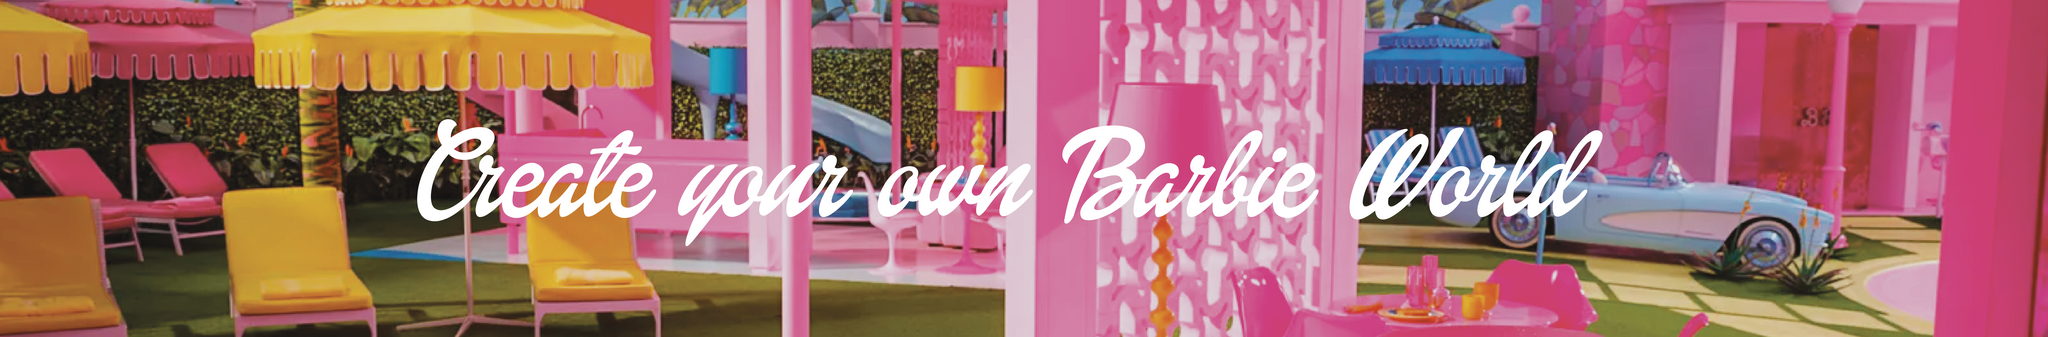 Create Your Own Barbie World Banner